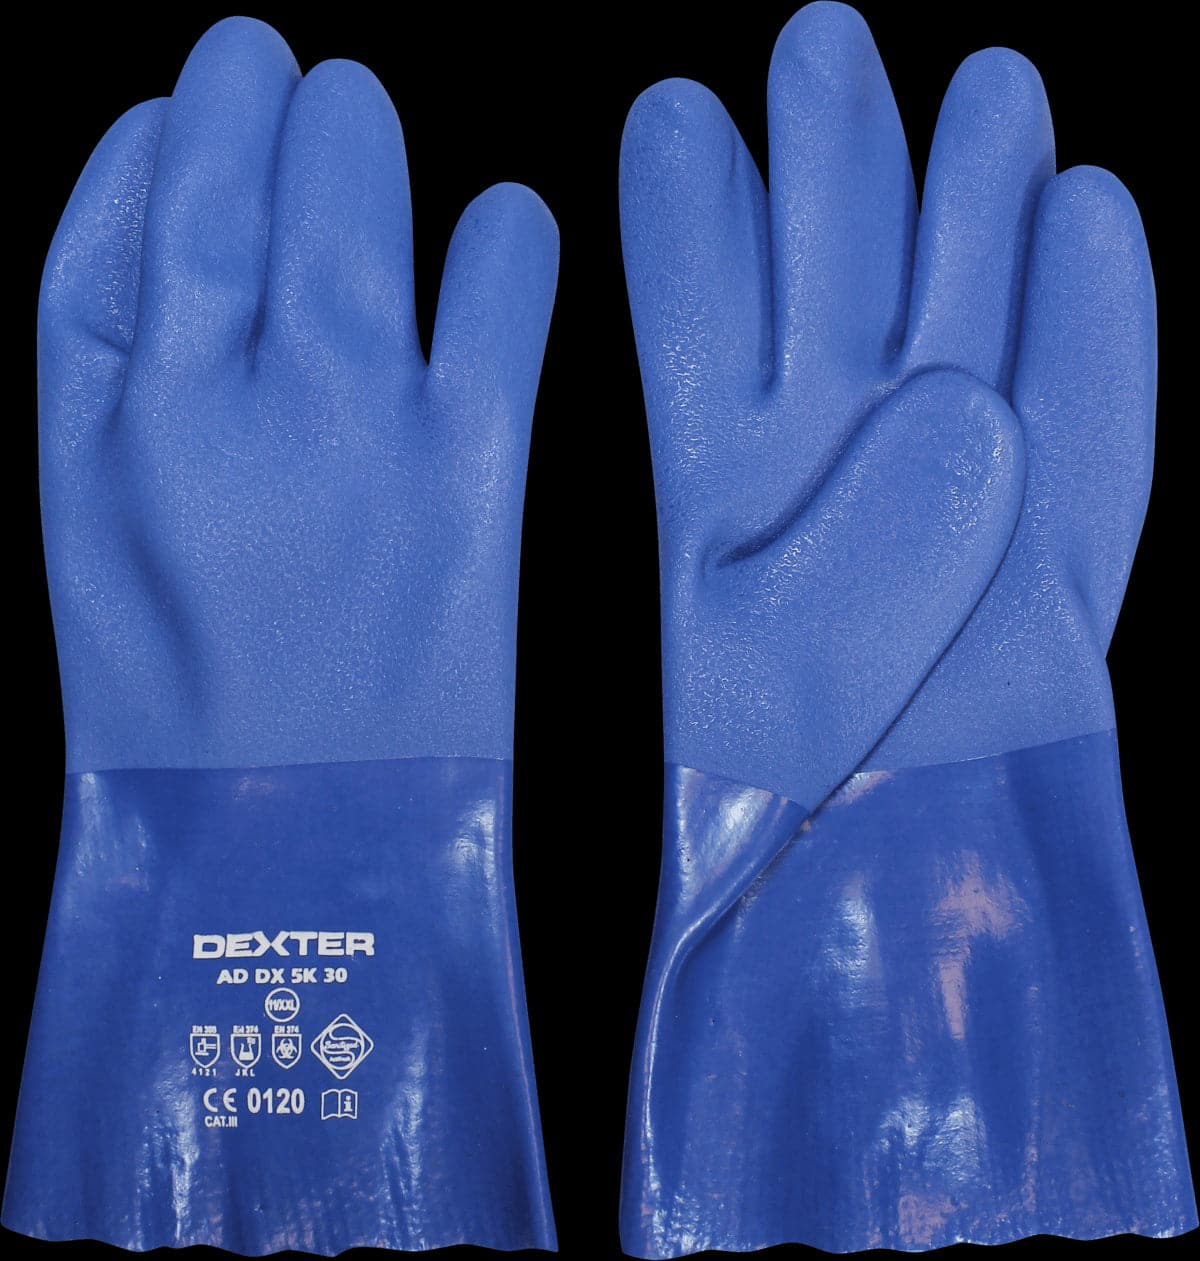 DEXTER LATEX GLOVES WITH PVC COATING, SIZE 9, L - best price from Maltashopper.com BR400001189